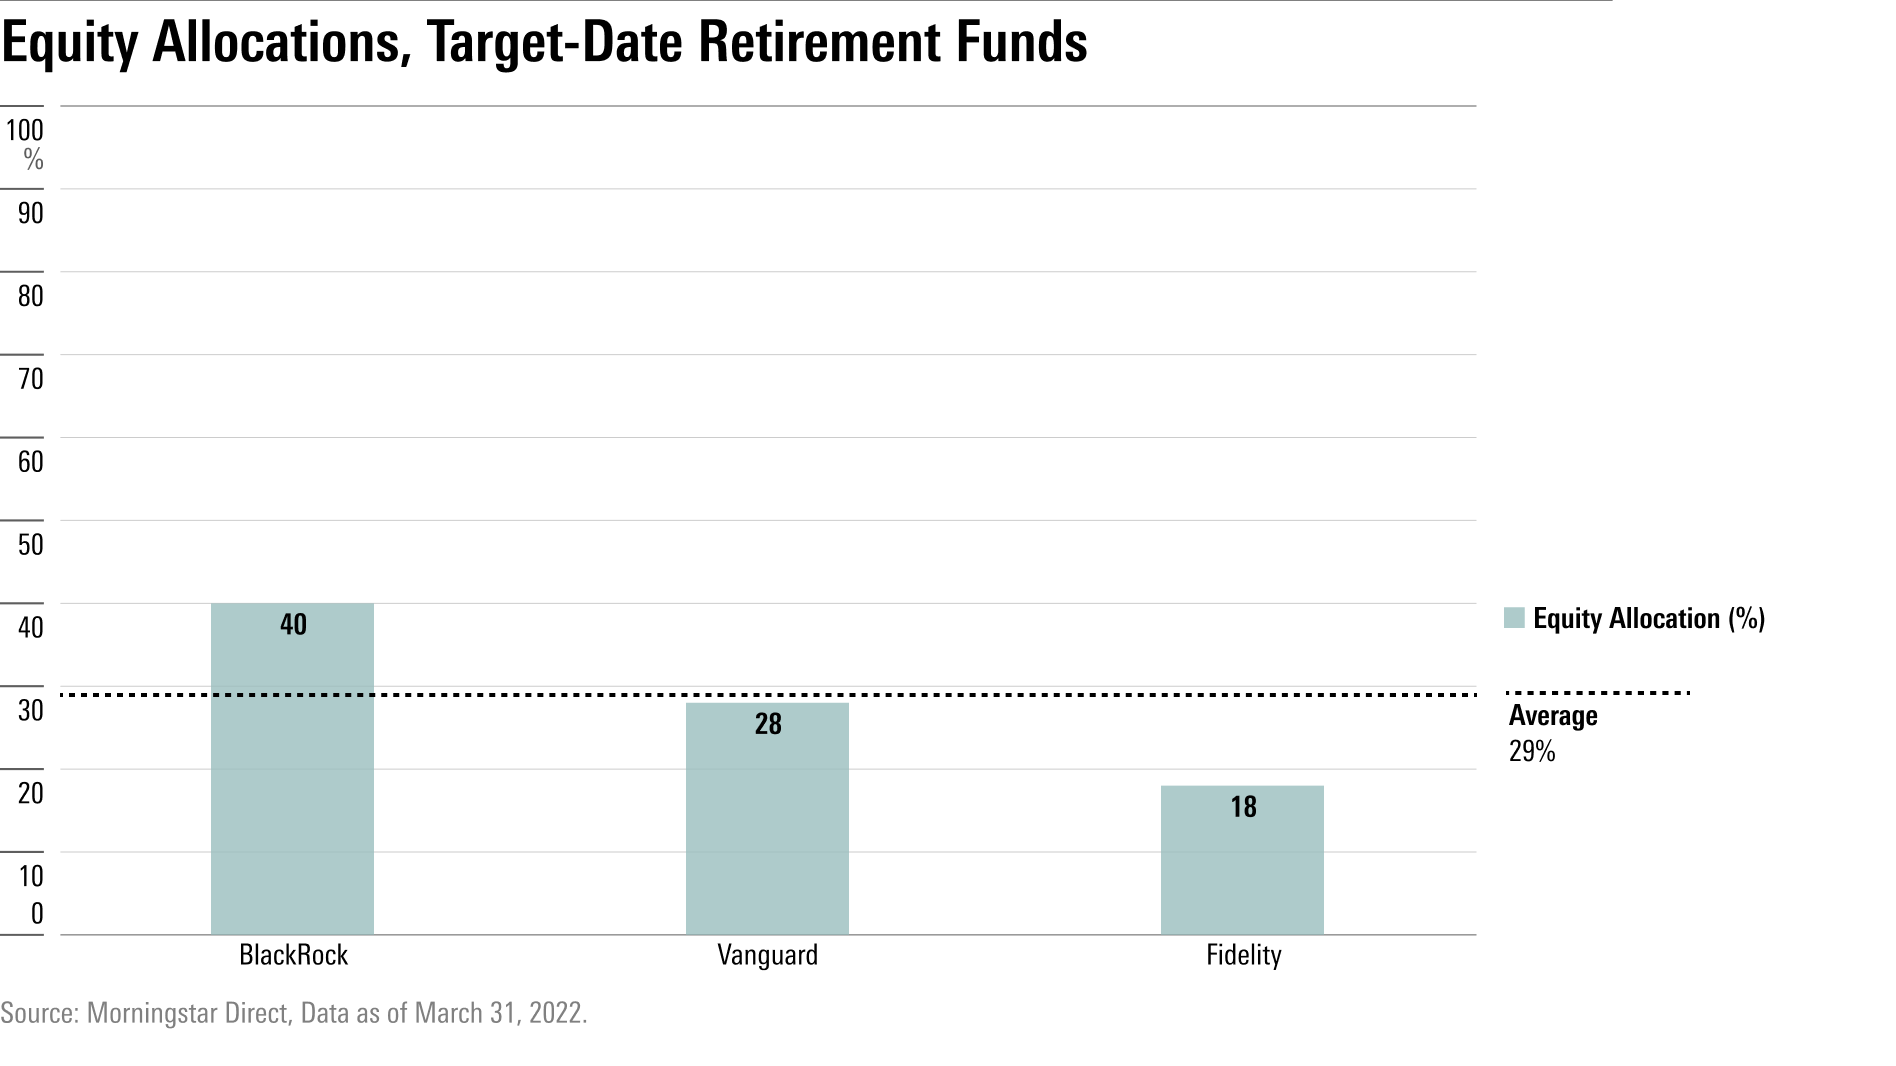 The equity allocations for the three largest target-date retirement funds.